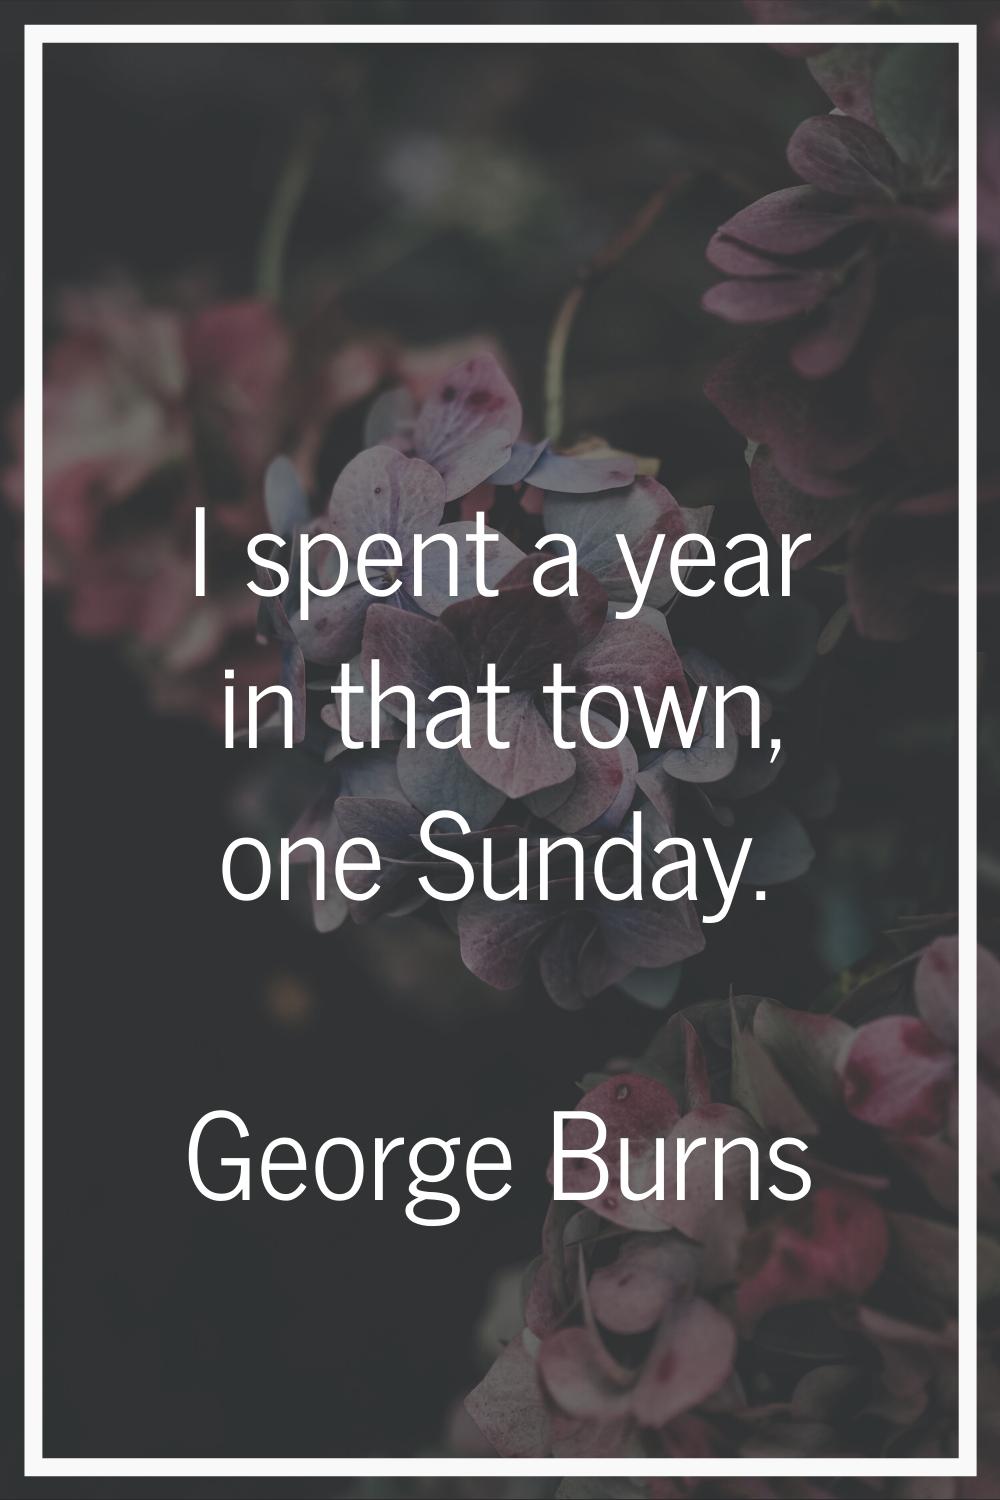 I spent a year in that town, one Sunday.